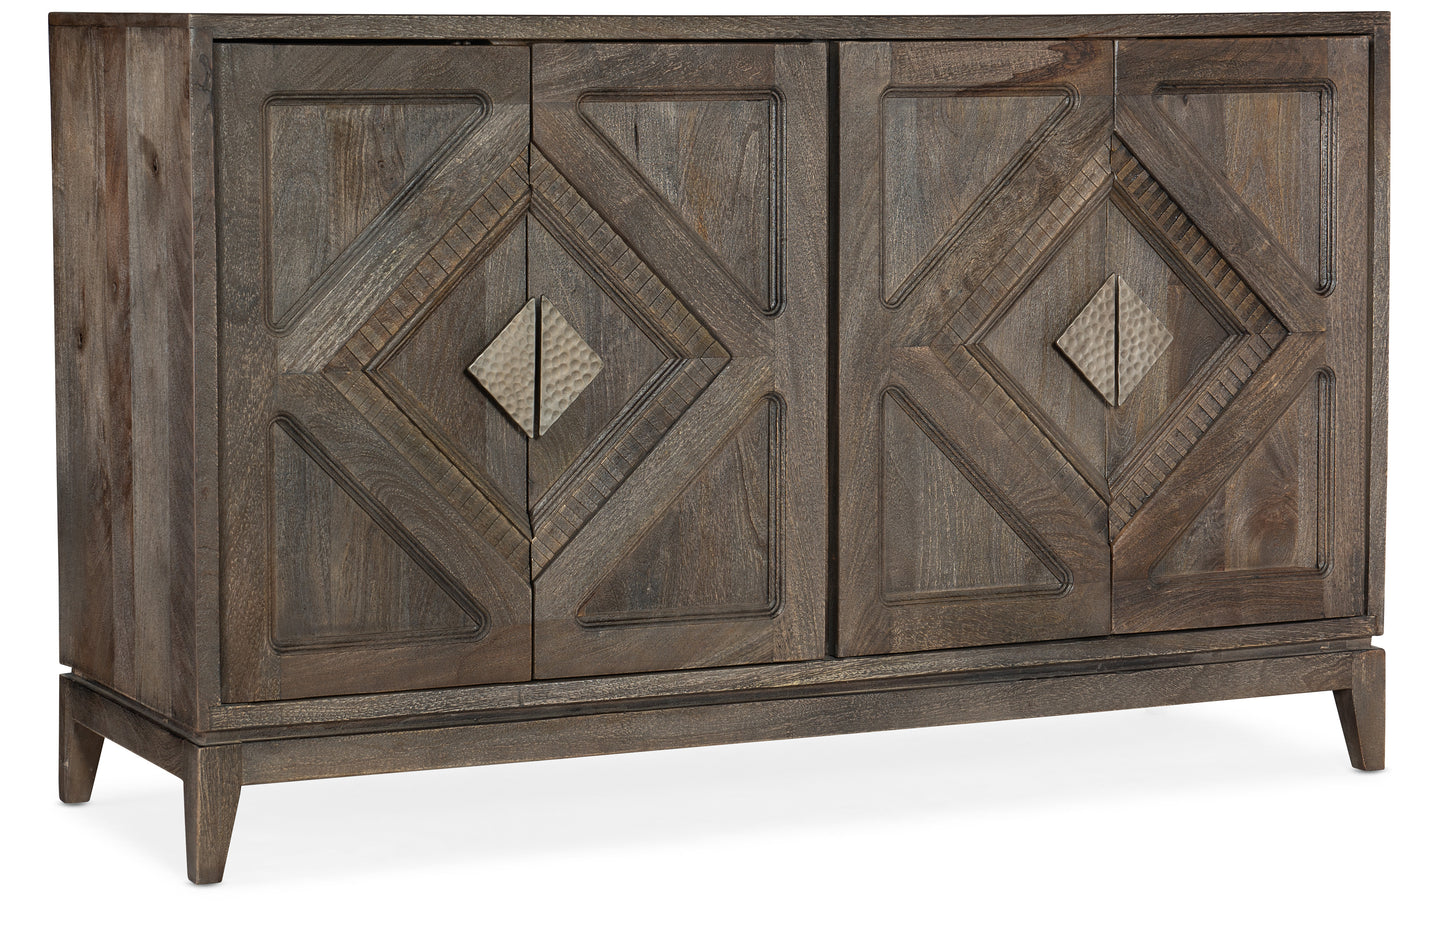 Commerce & Market Carved Accent Chest